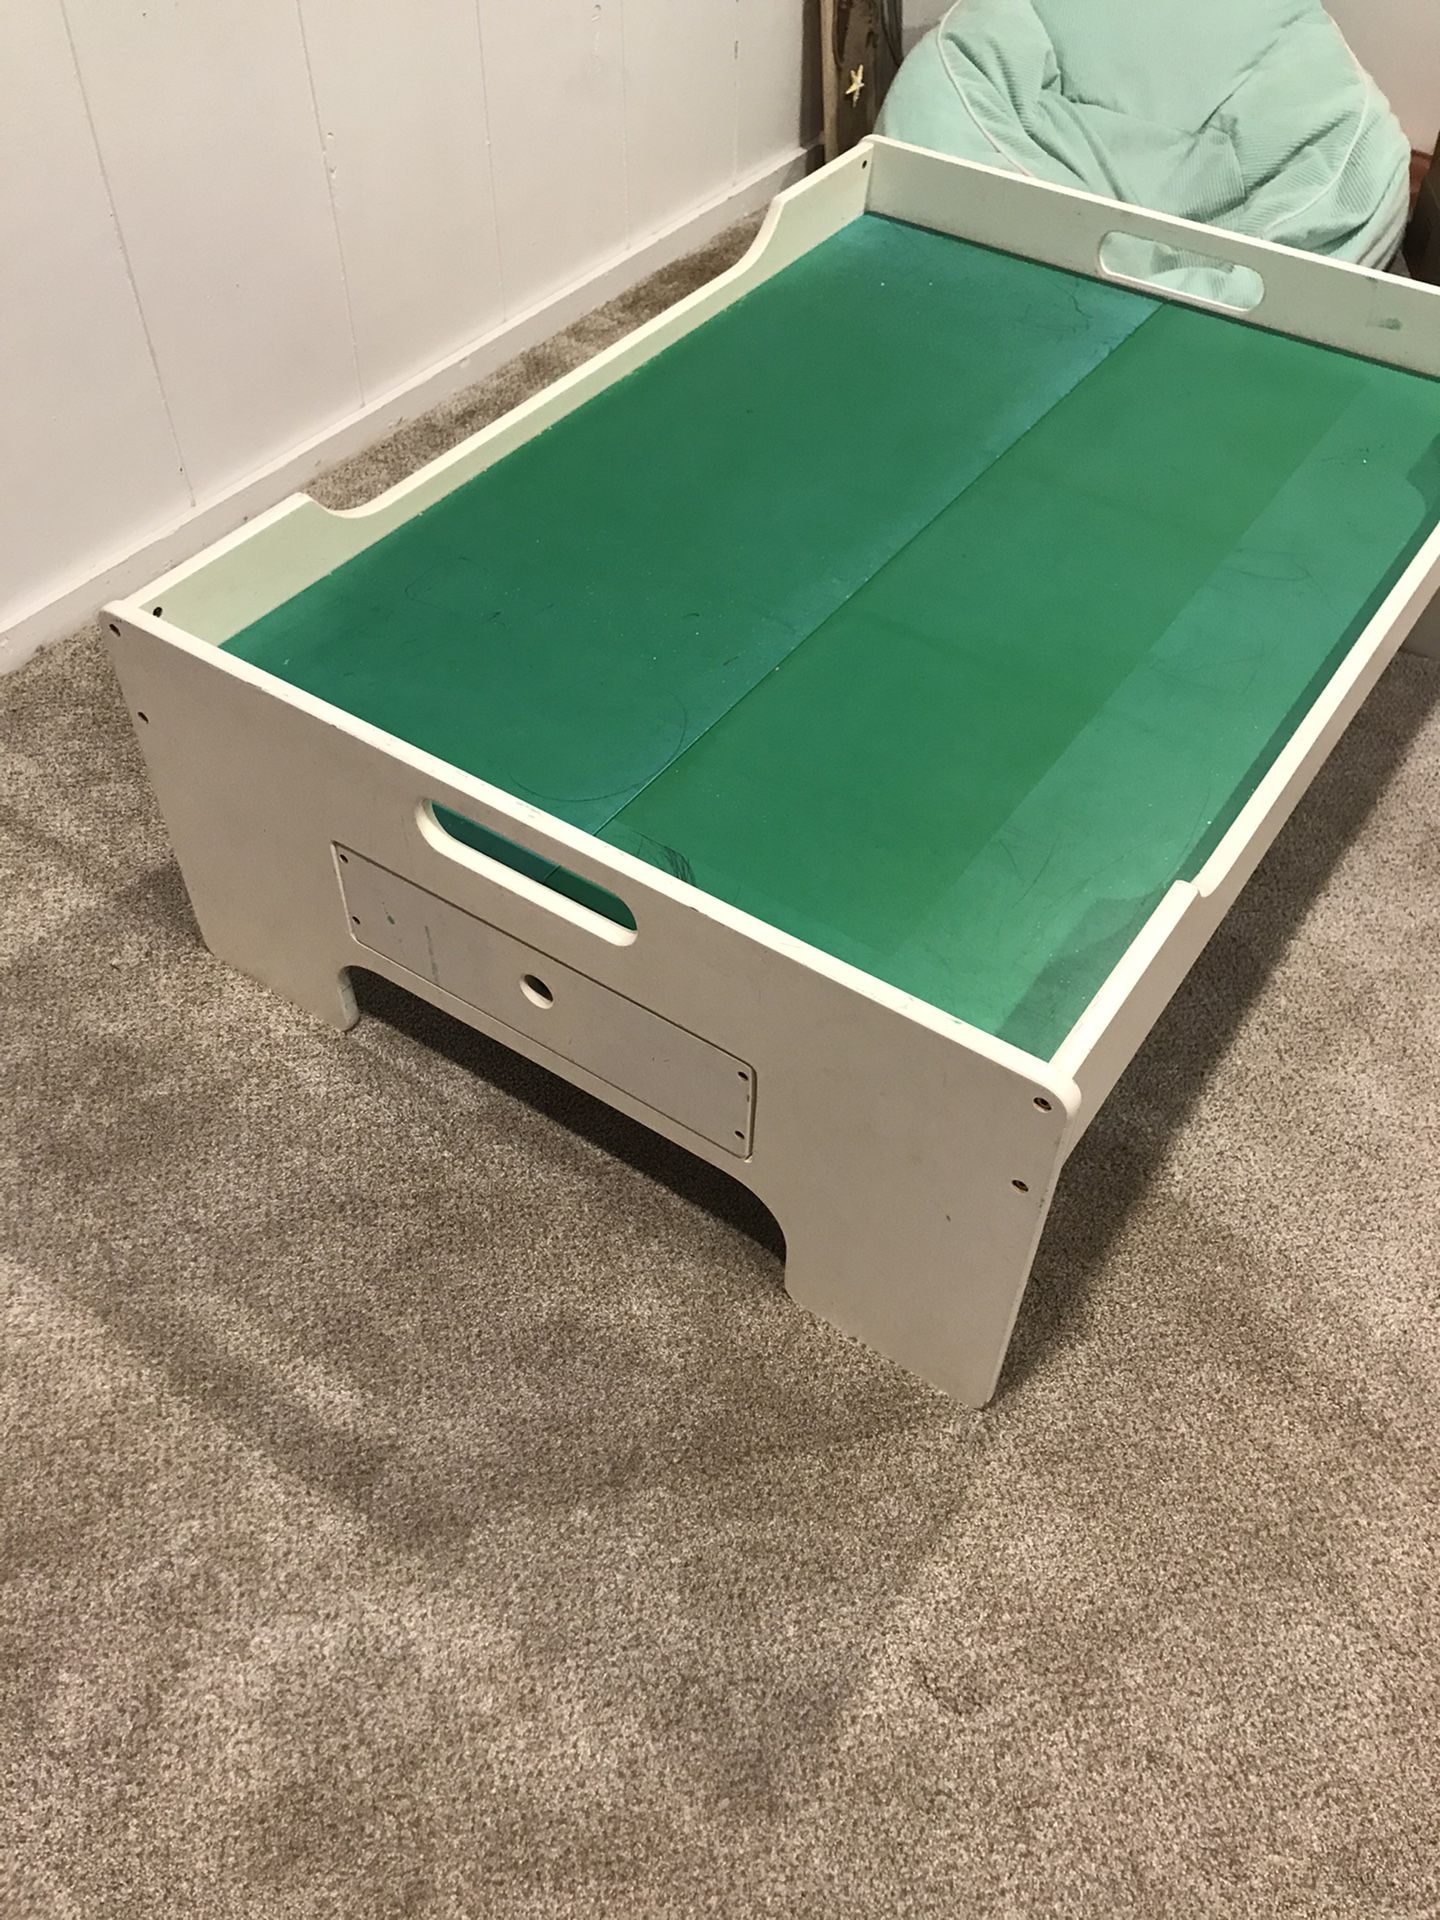 Kids play table, toy storage